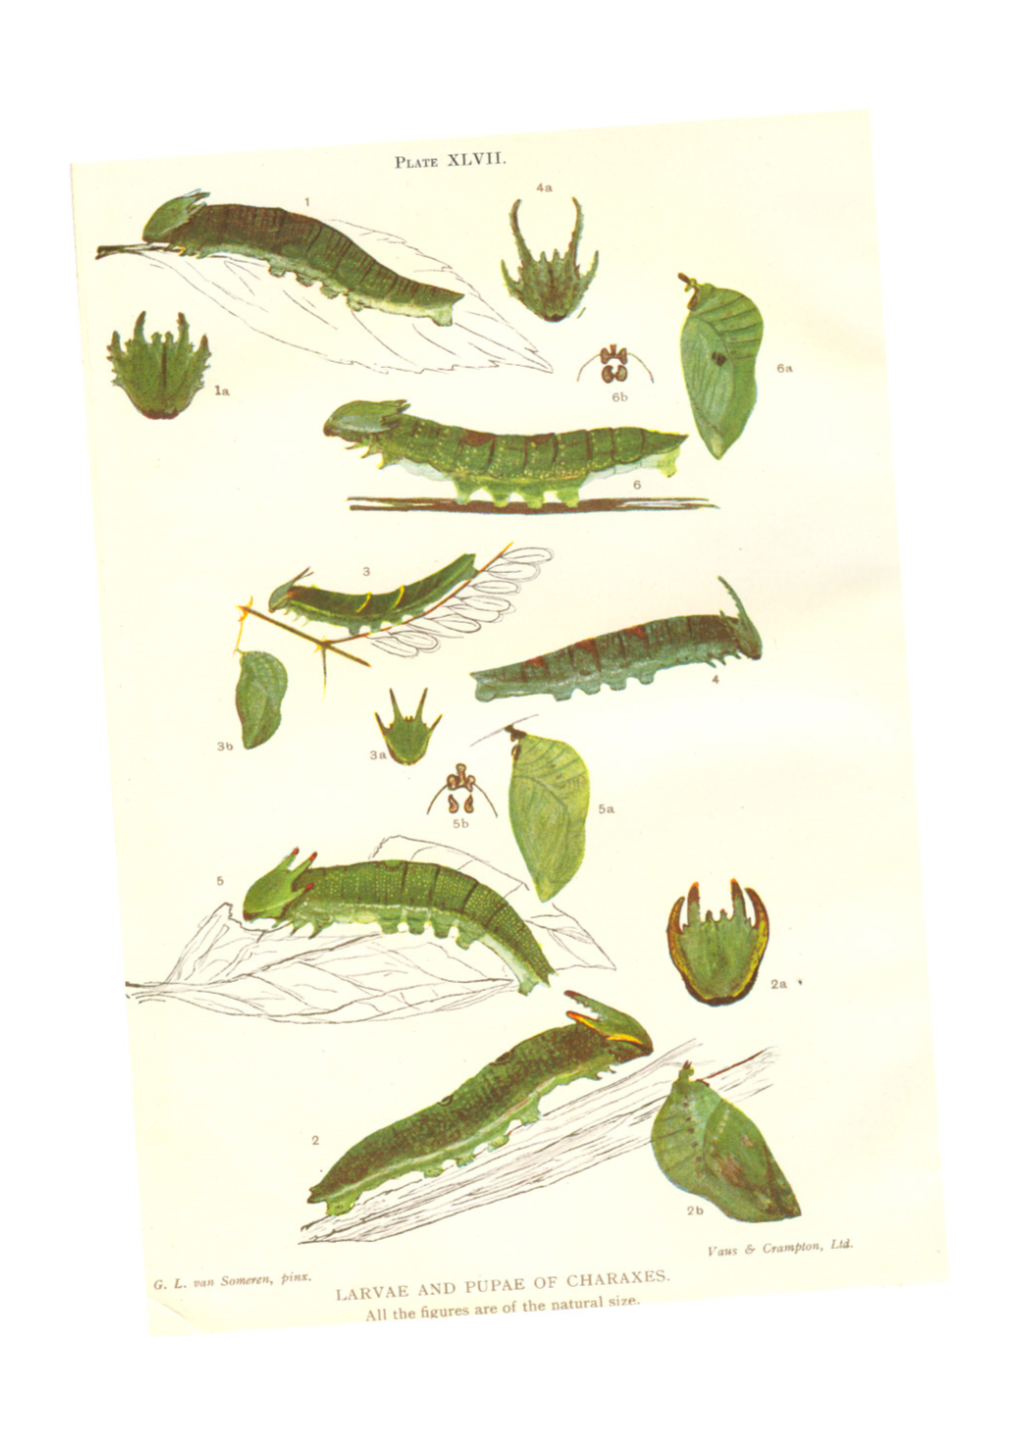 LARVAE and PUPAE of CHARAXES. All the Figures Are of the Natural Size. PLATE XL VIII